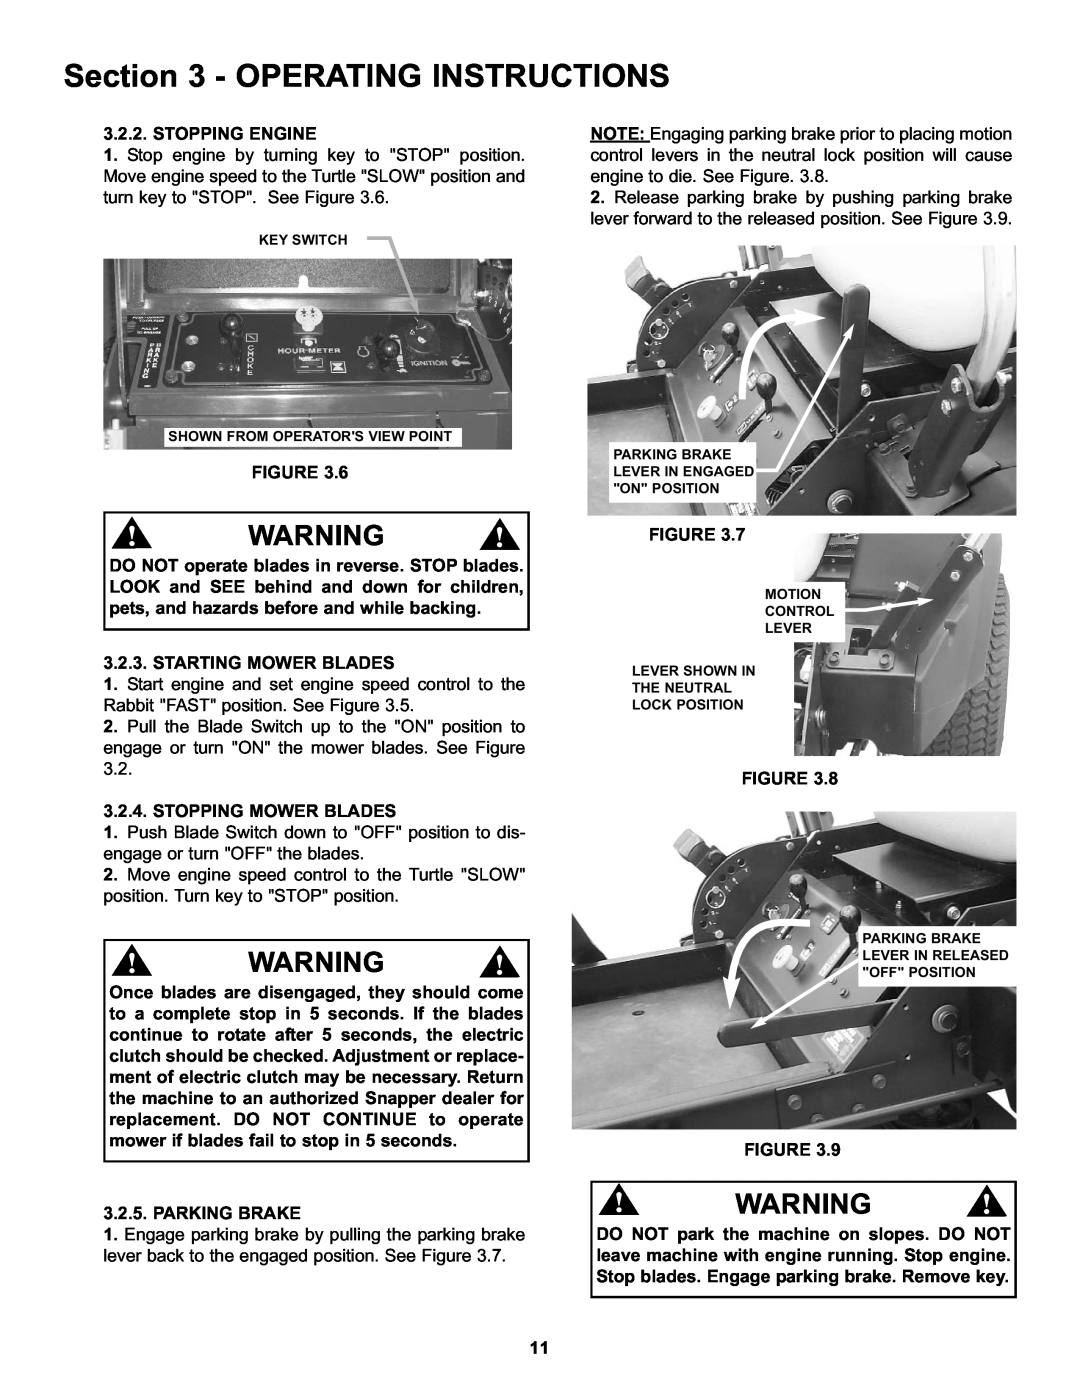 Snapper HZT21481BV important safety instructions Operating Instructions, Stopping Engine 